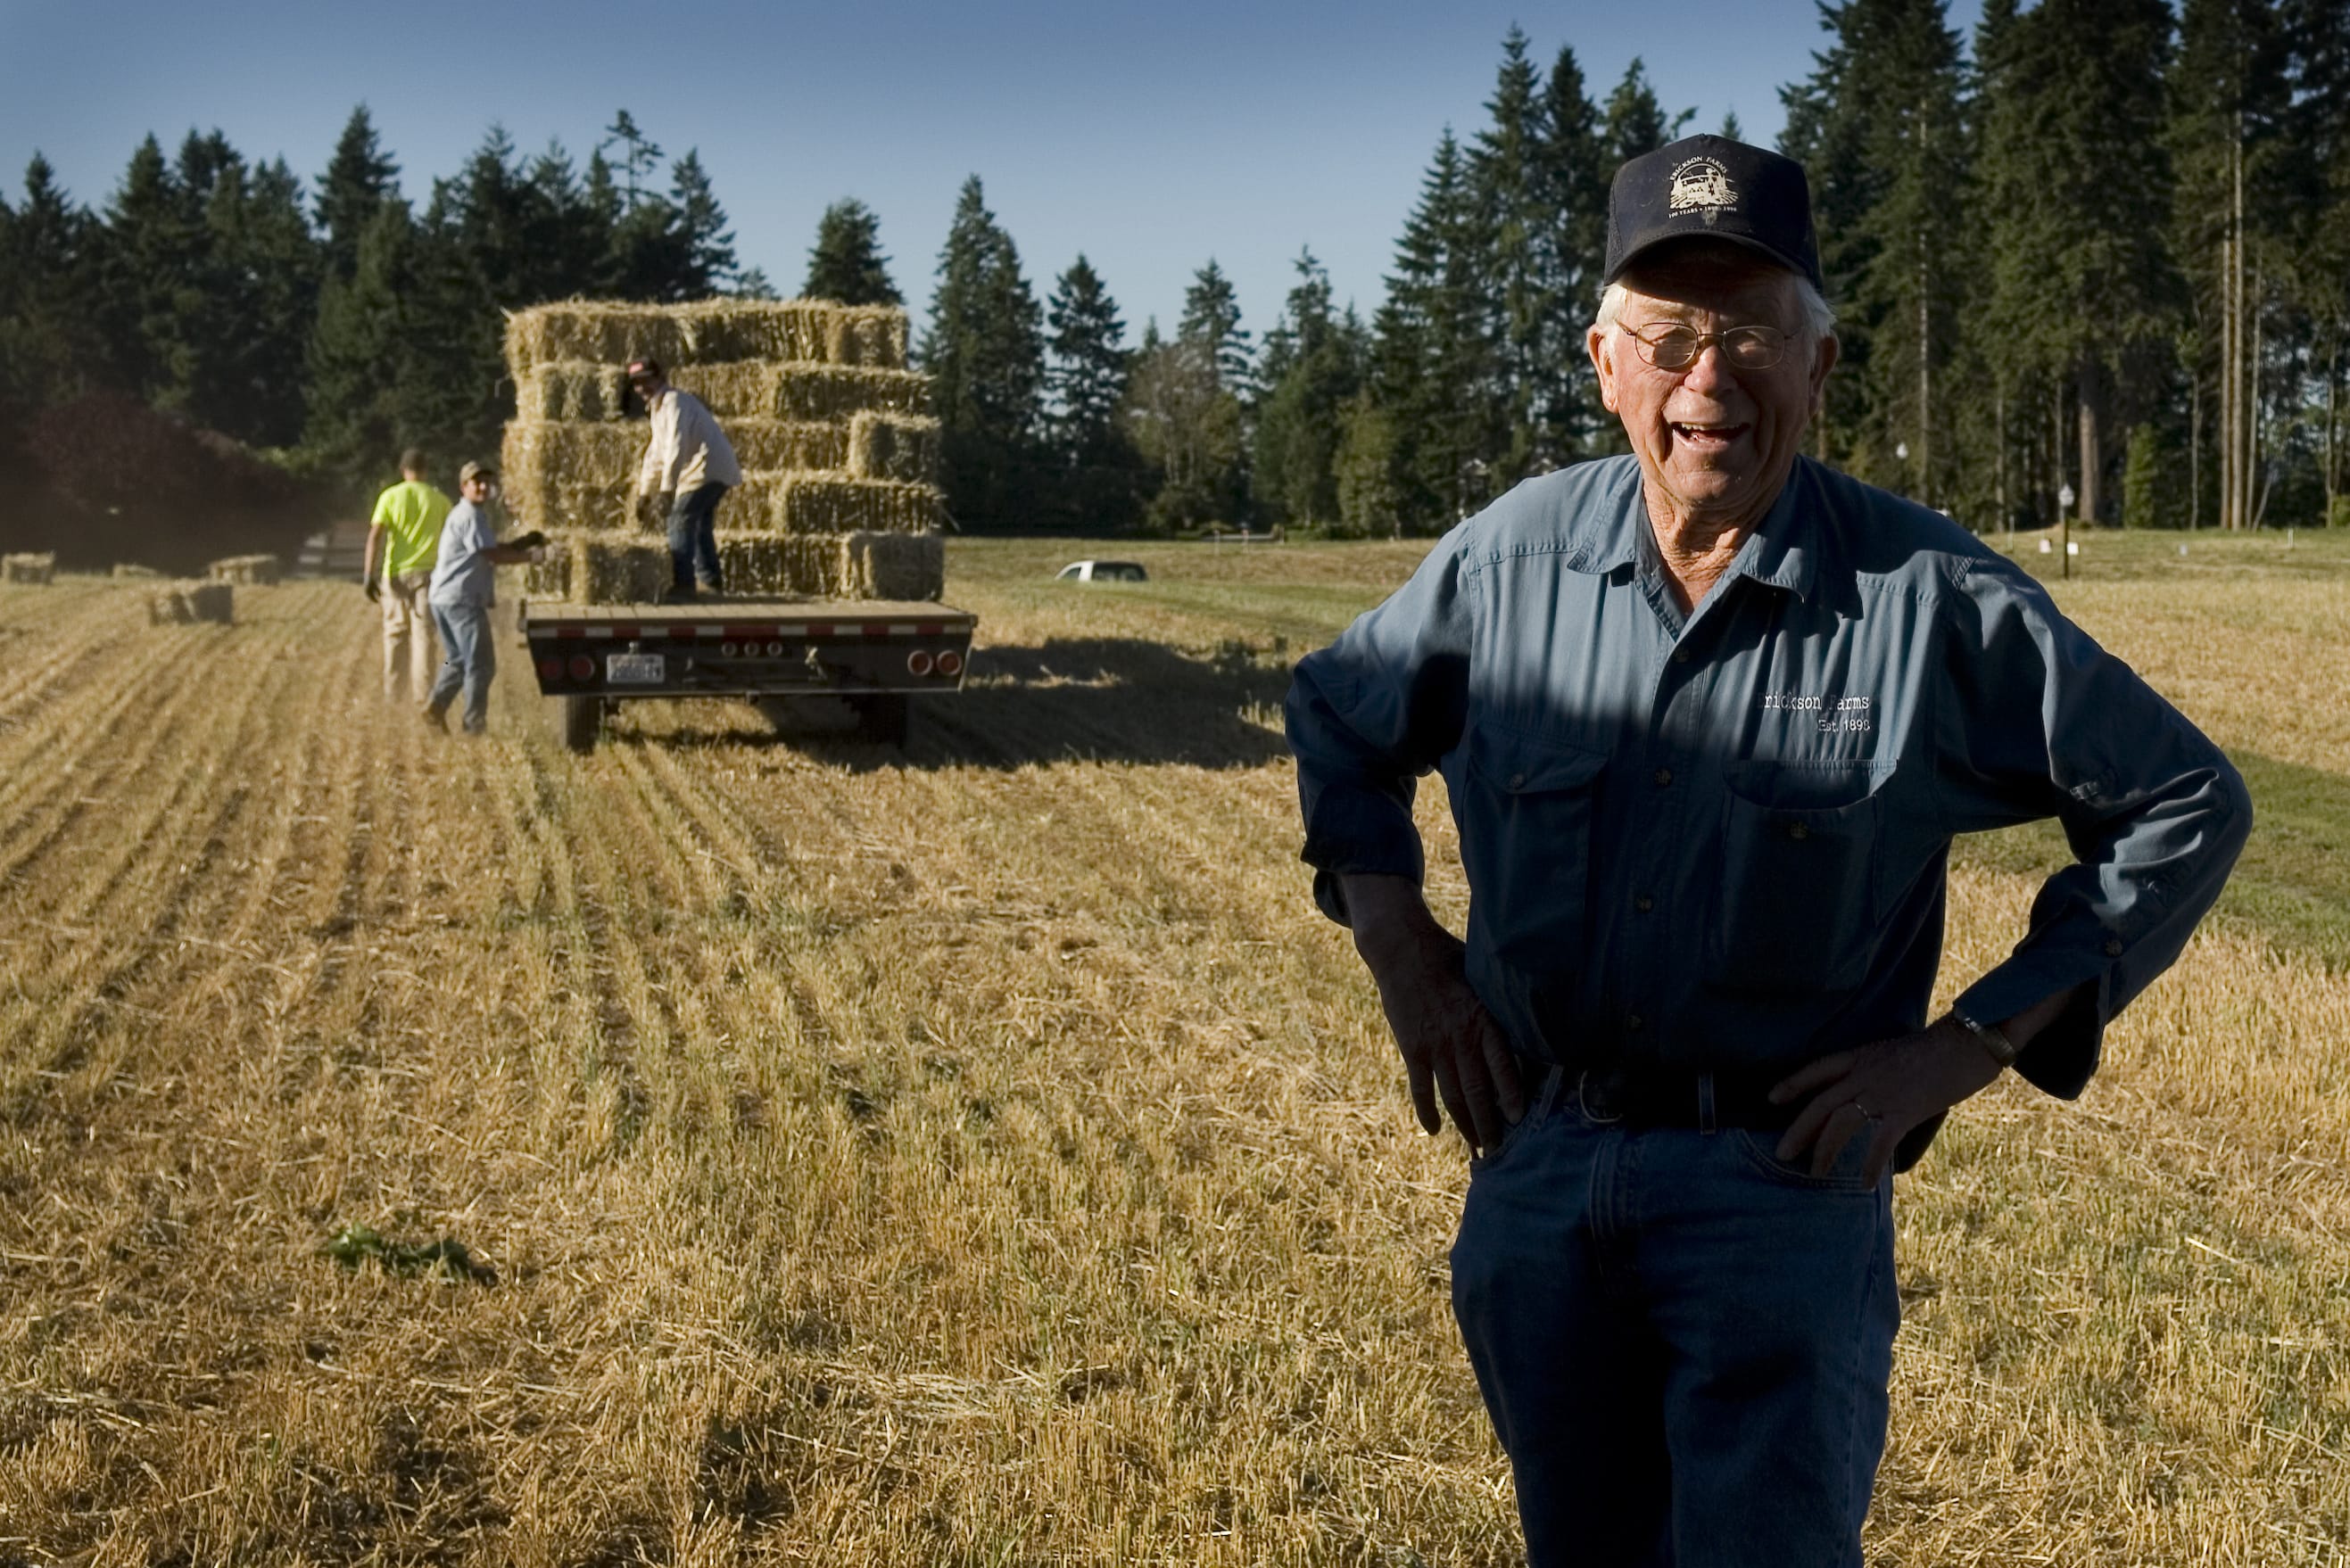 Vinton Erickson during a harvest day in August 2007.